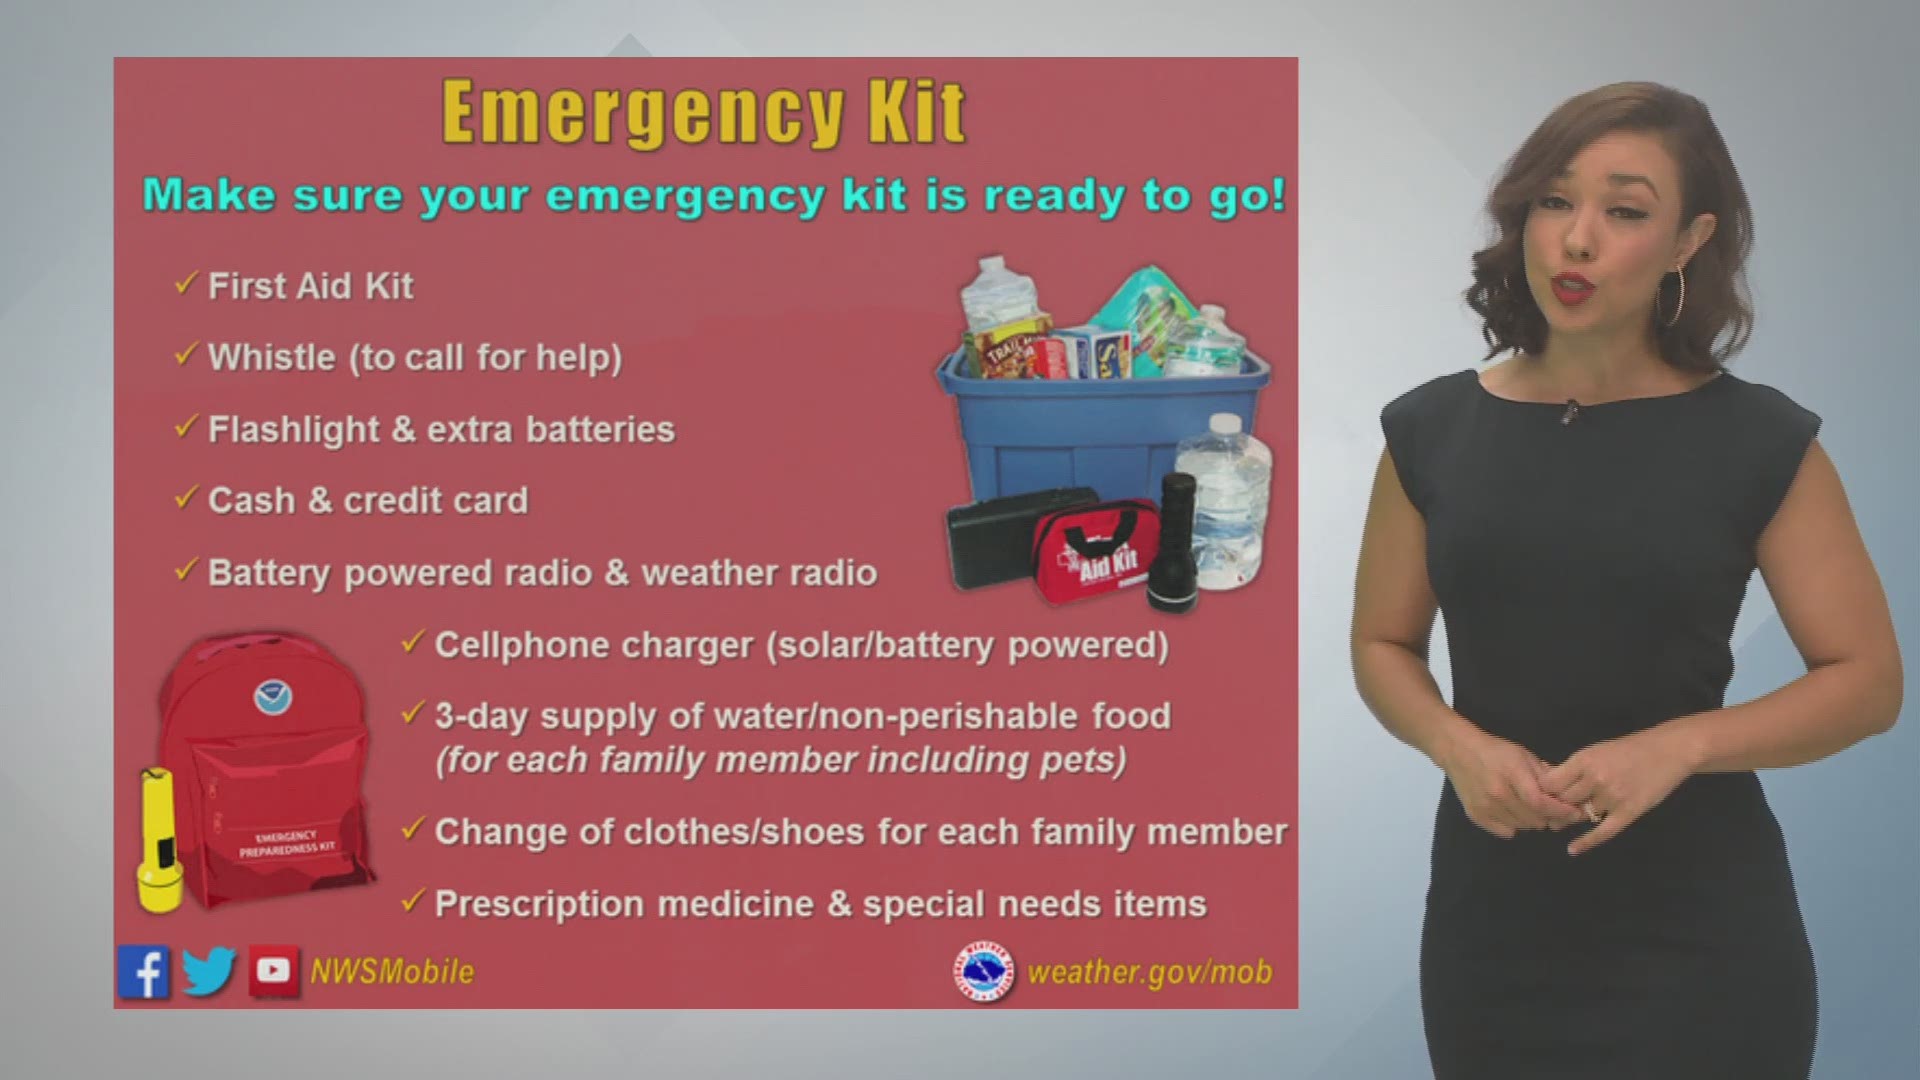 HURRICANE SUPPLY KIT: Food to put in your emergency kit